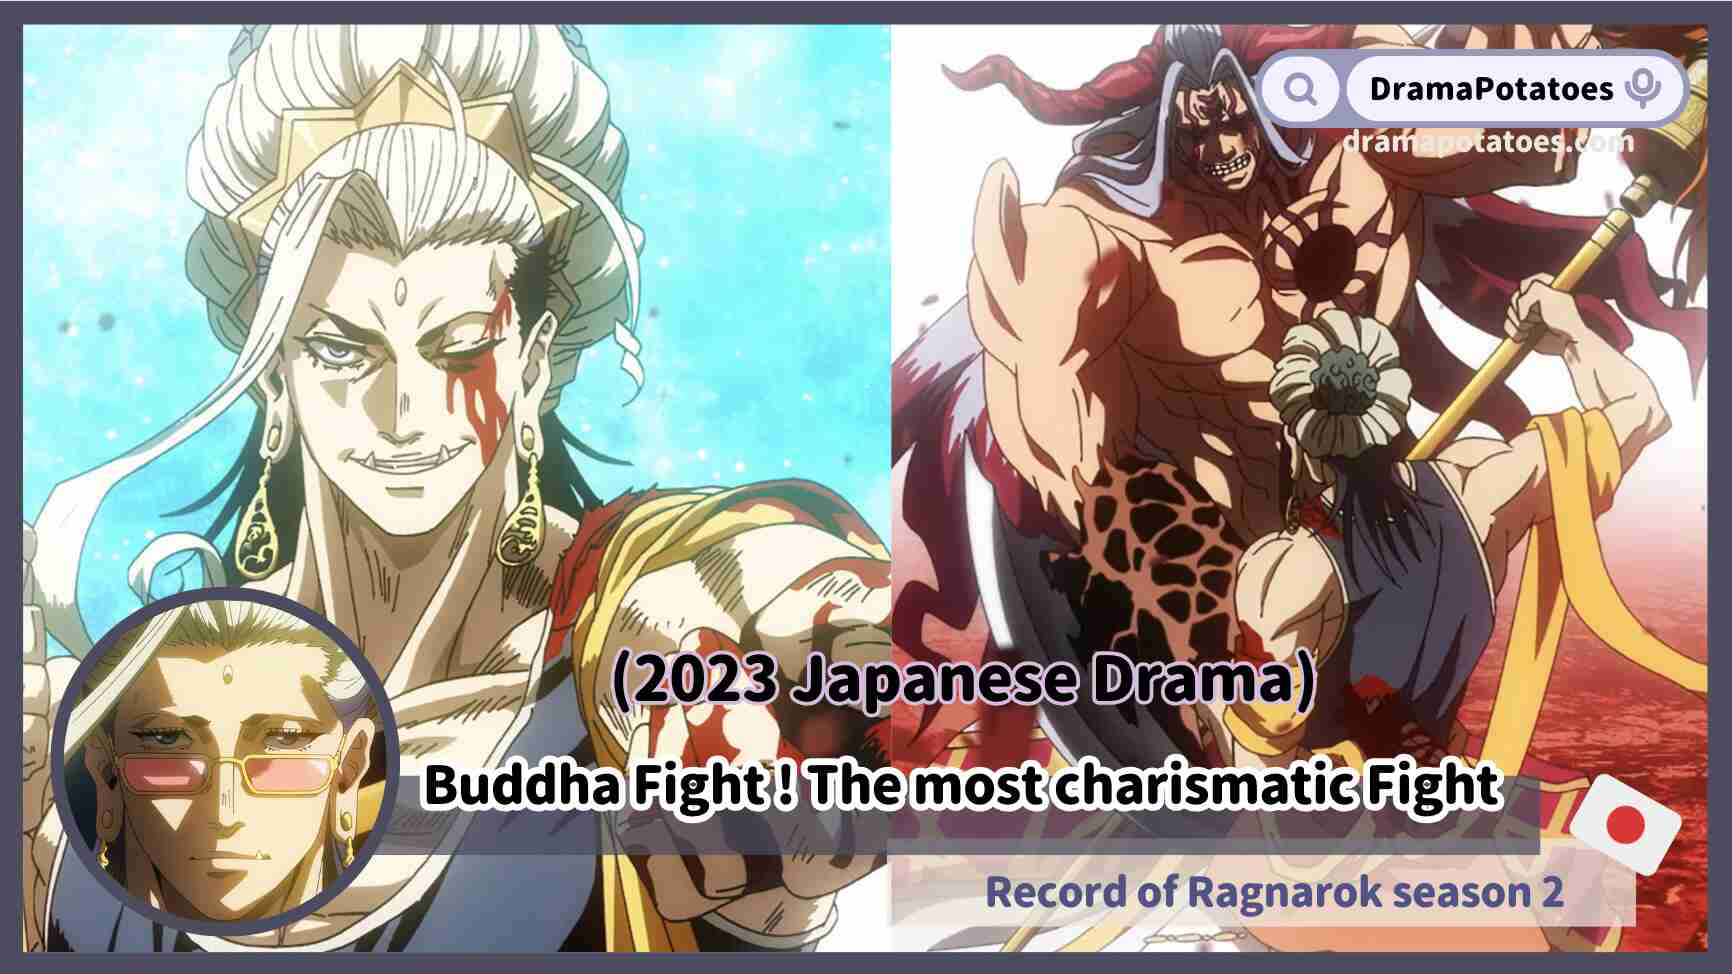 Season 3 of Record of Ragnarok The anime will feature Rounds 7, 8, and